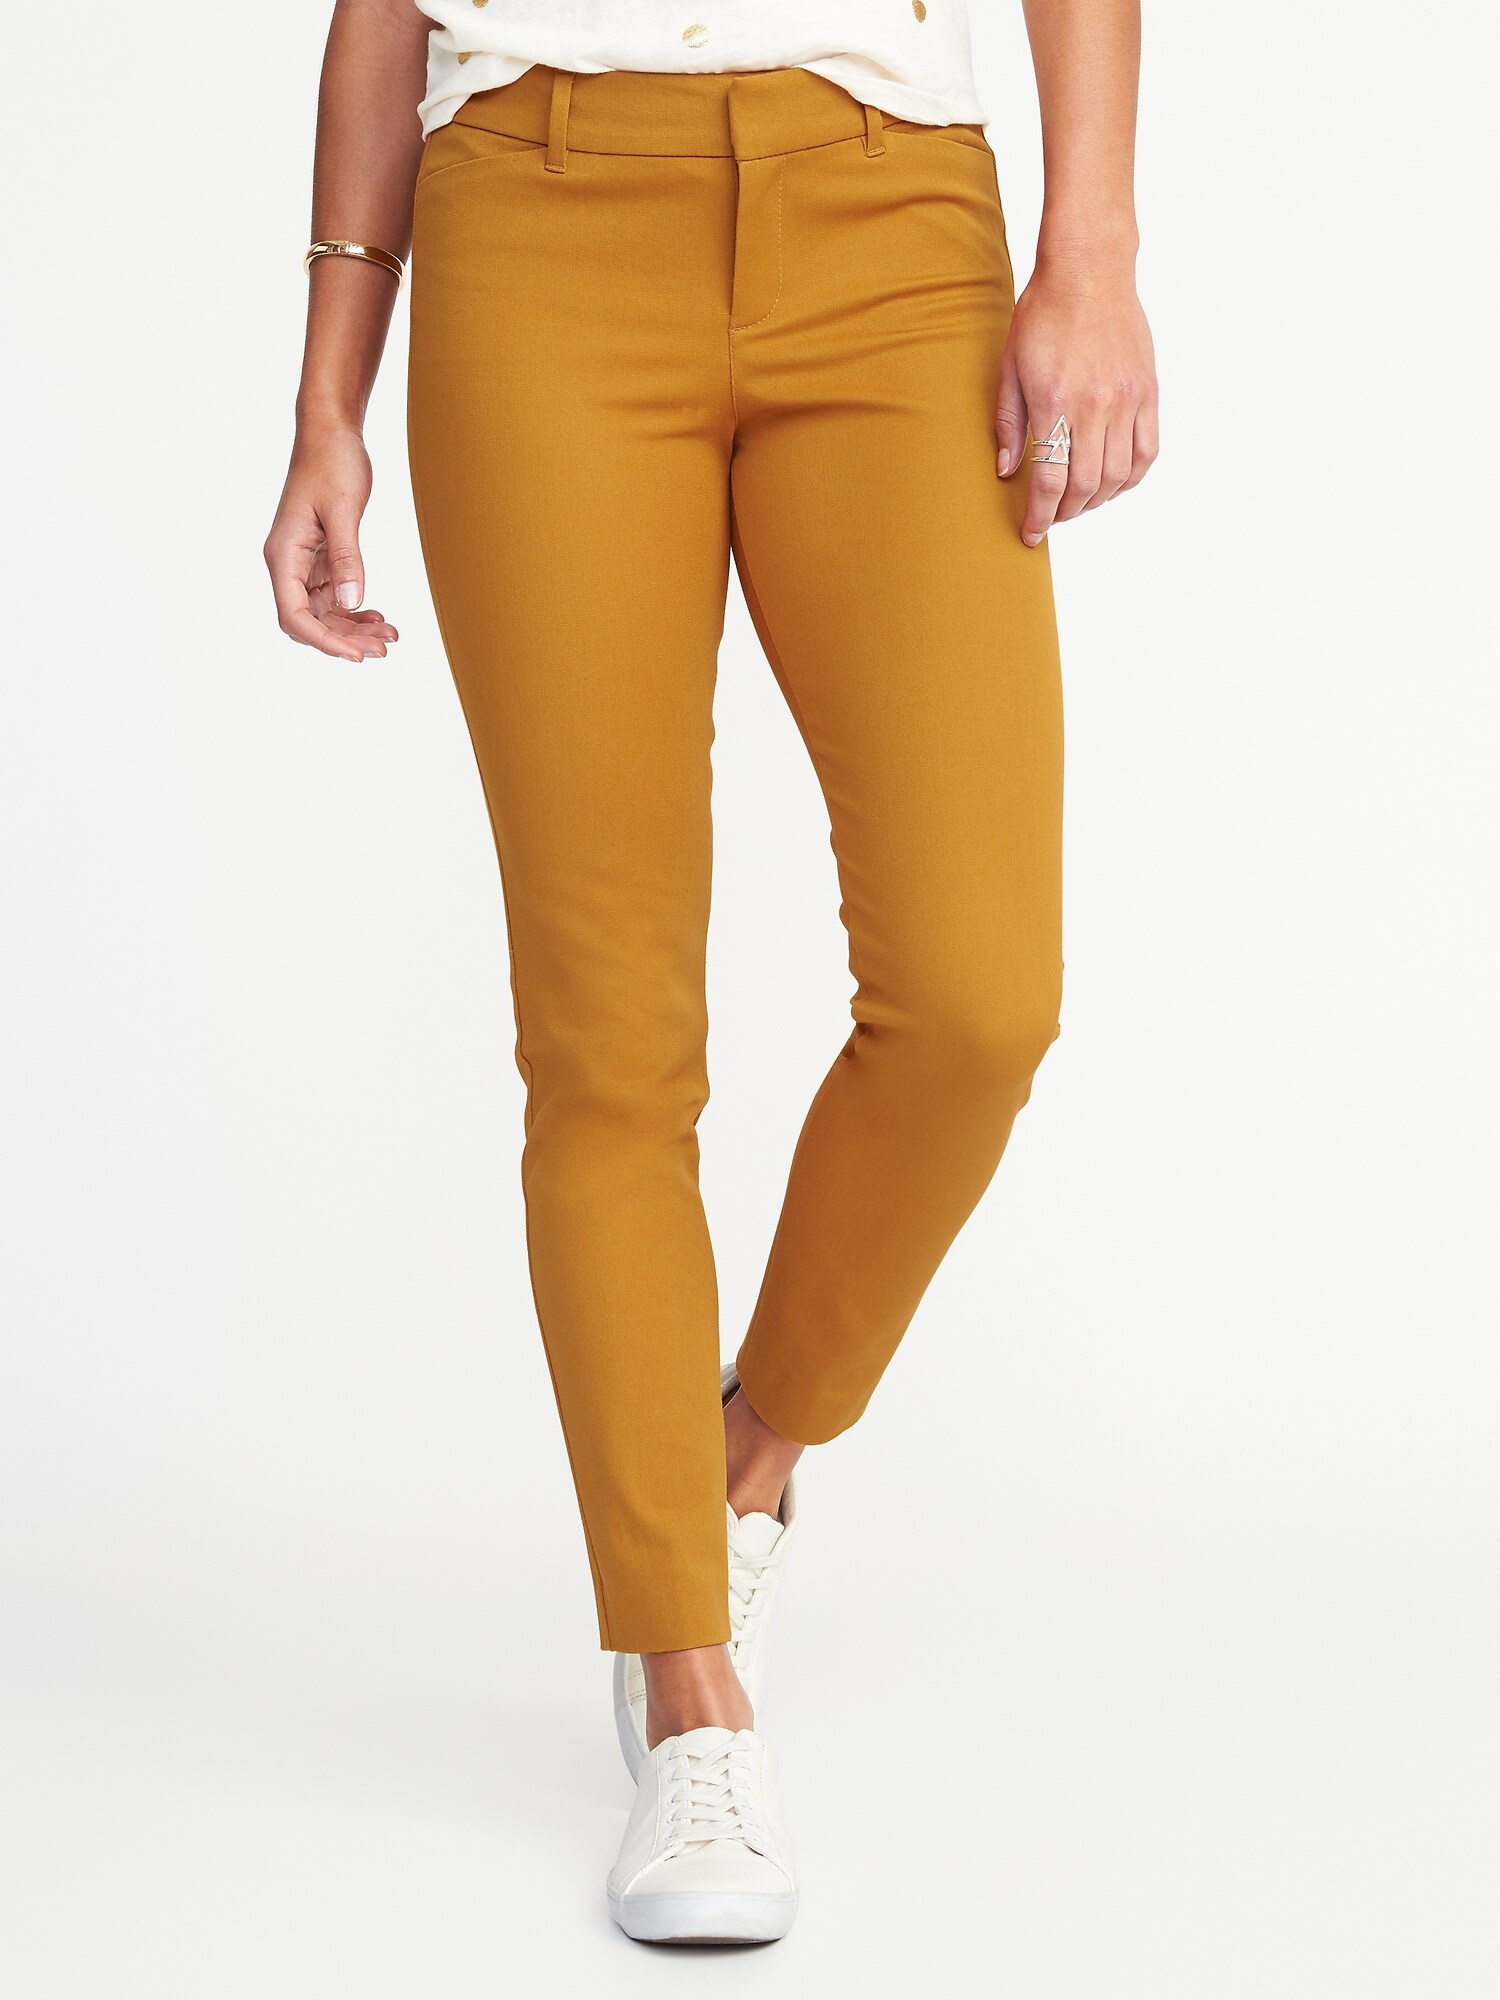 The Pixie Mid-Rise Ankle Pants, Old Navy